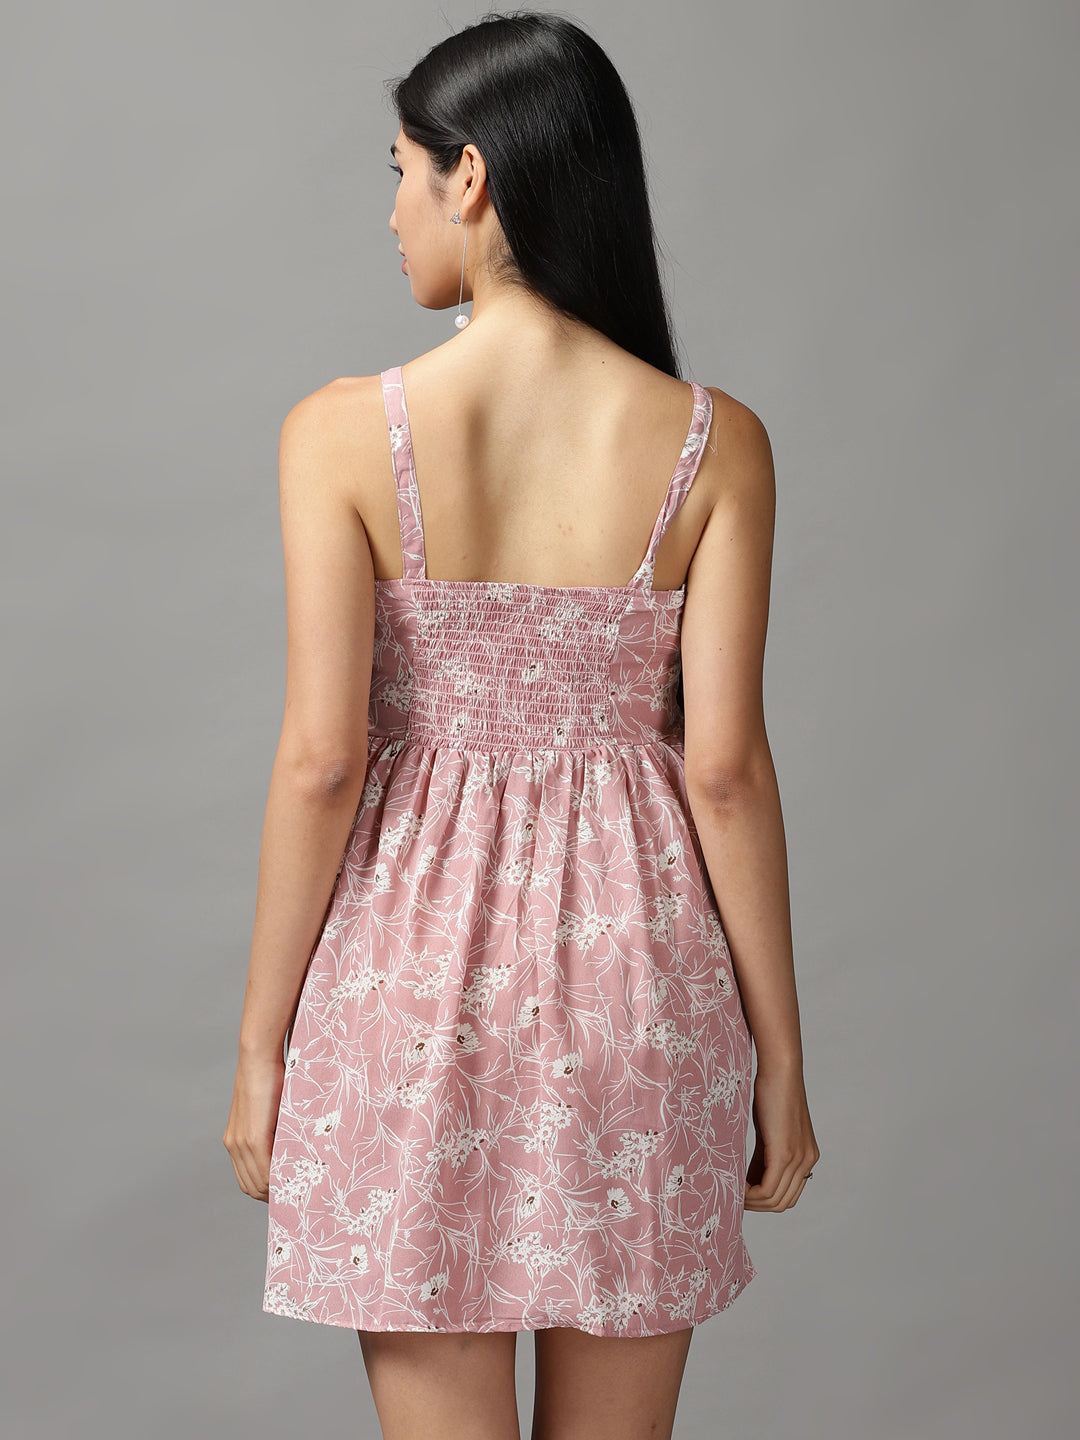 Women's Mauve Printed Fit and Flare Dress